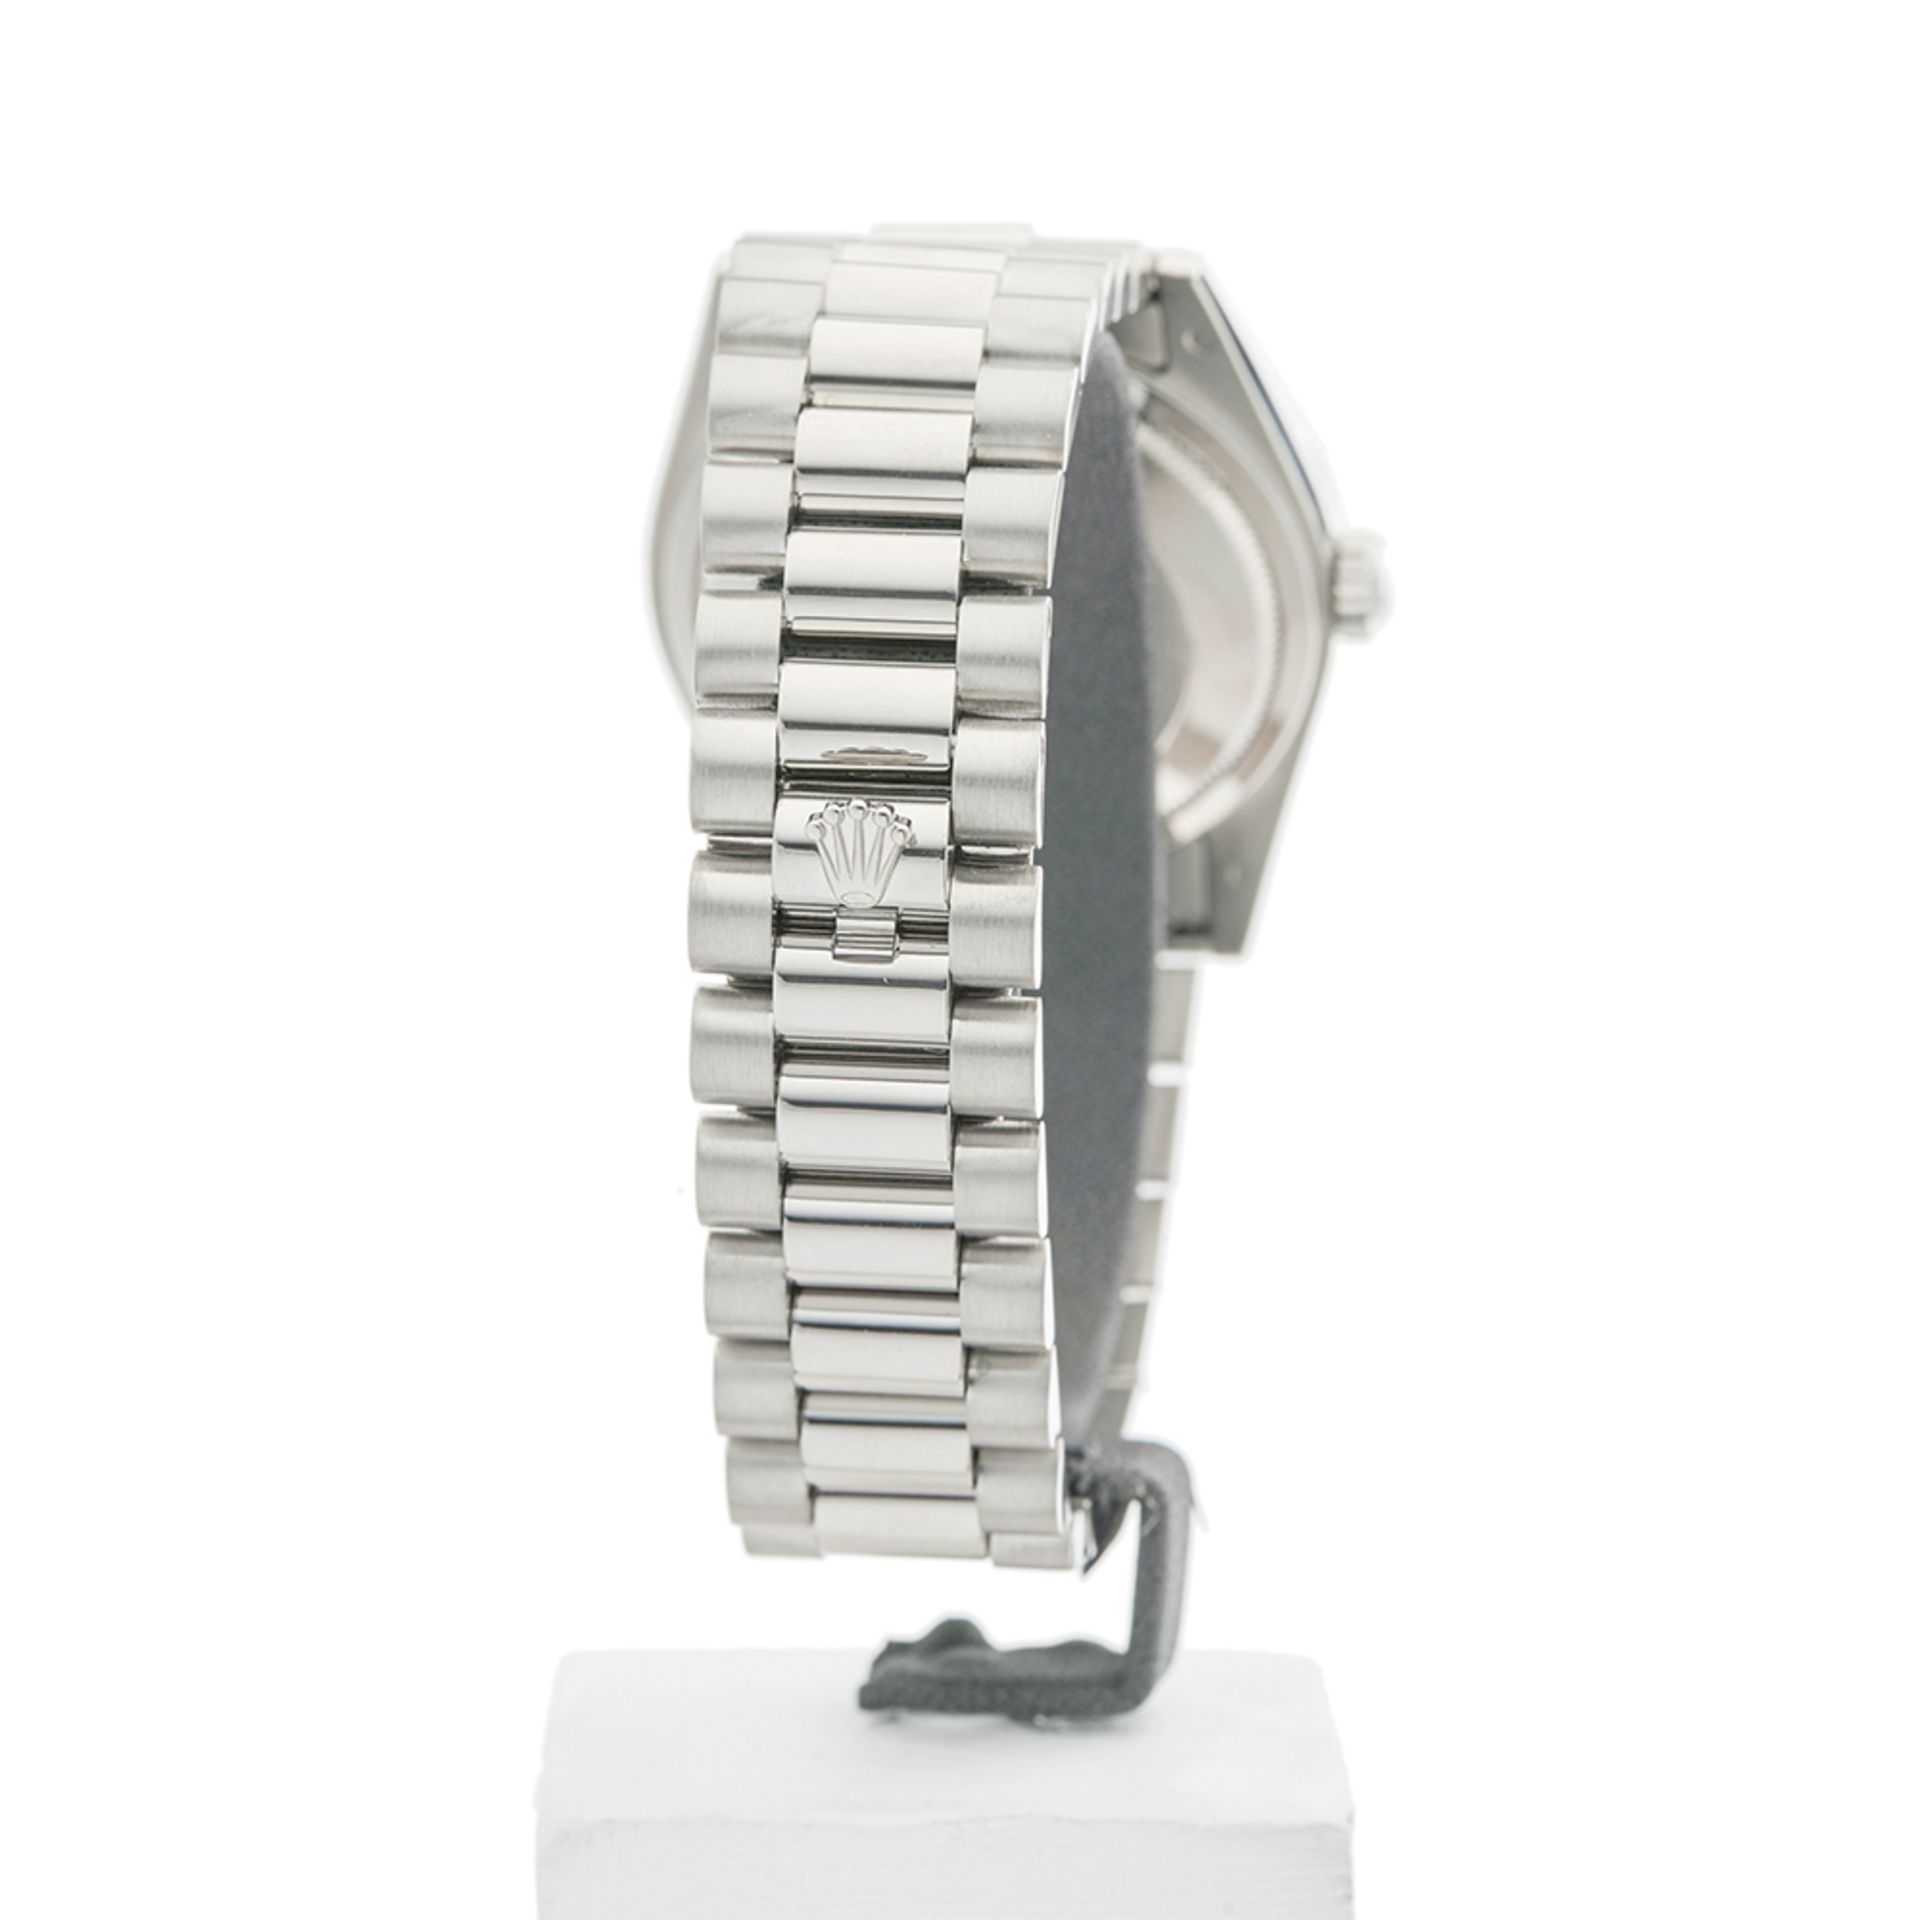 Day-Date 36mm 18K White Gold - 118239 - Image 7 of 9